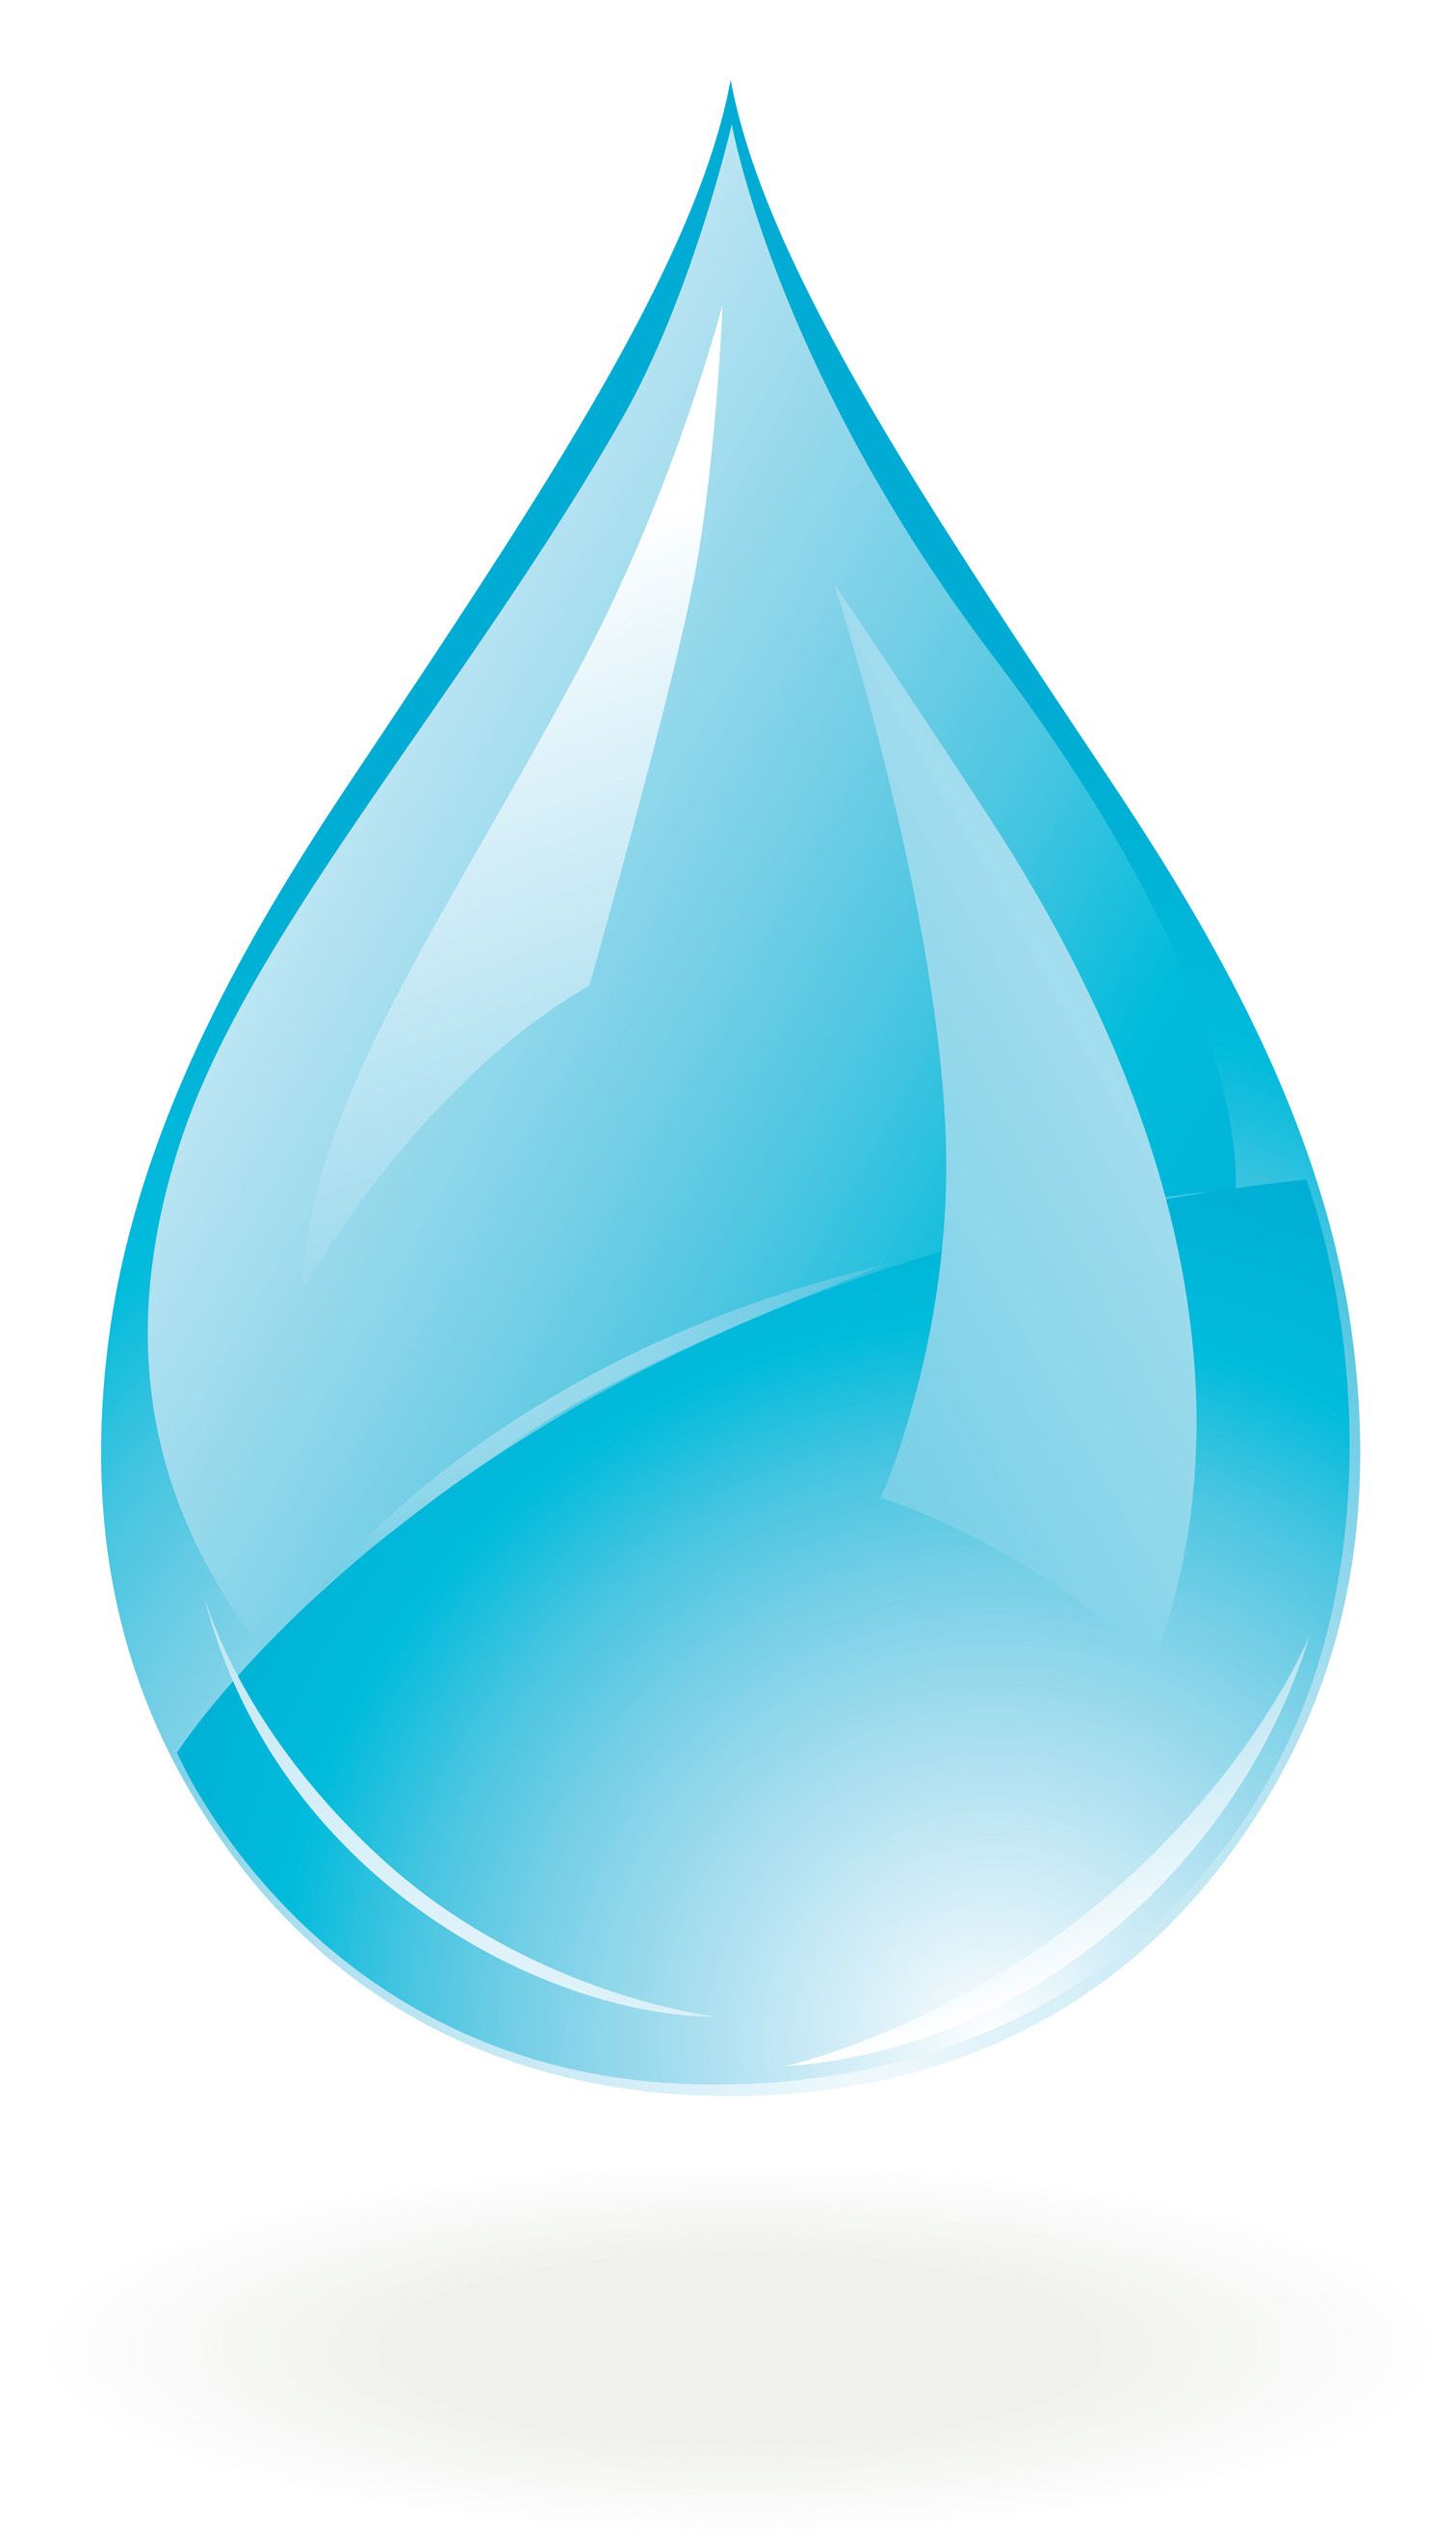 Water Drop Psd Clipart - Water Drops Clipart